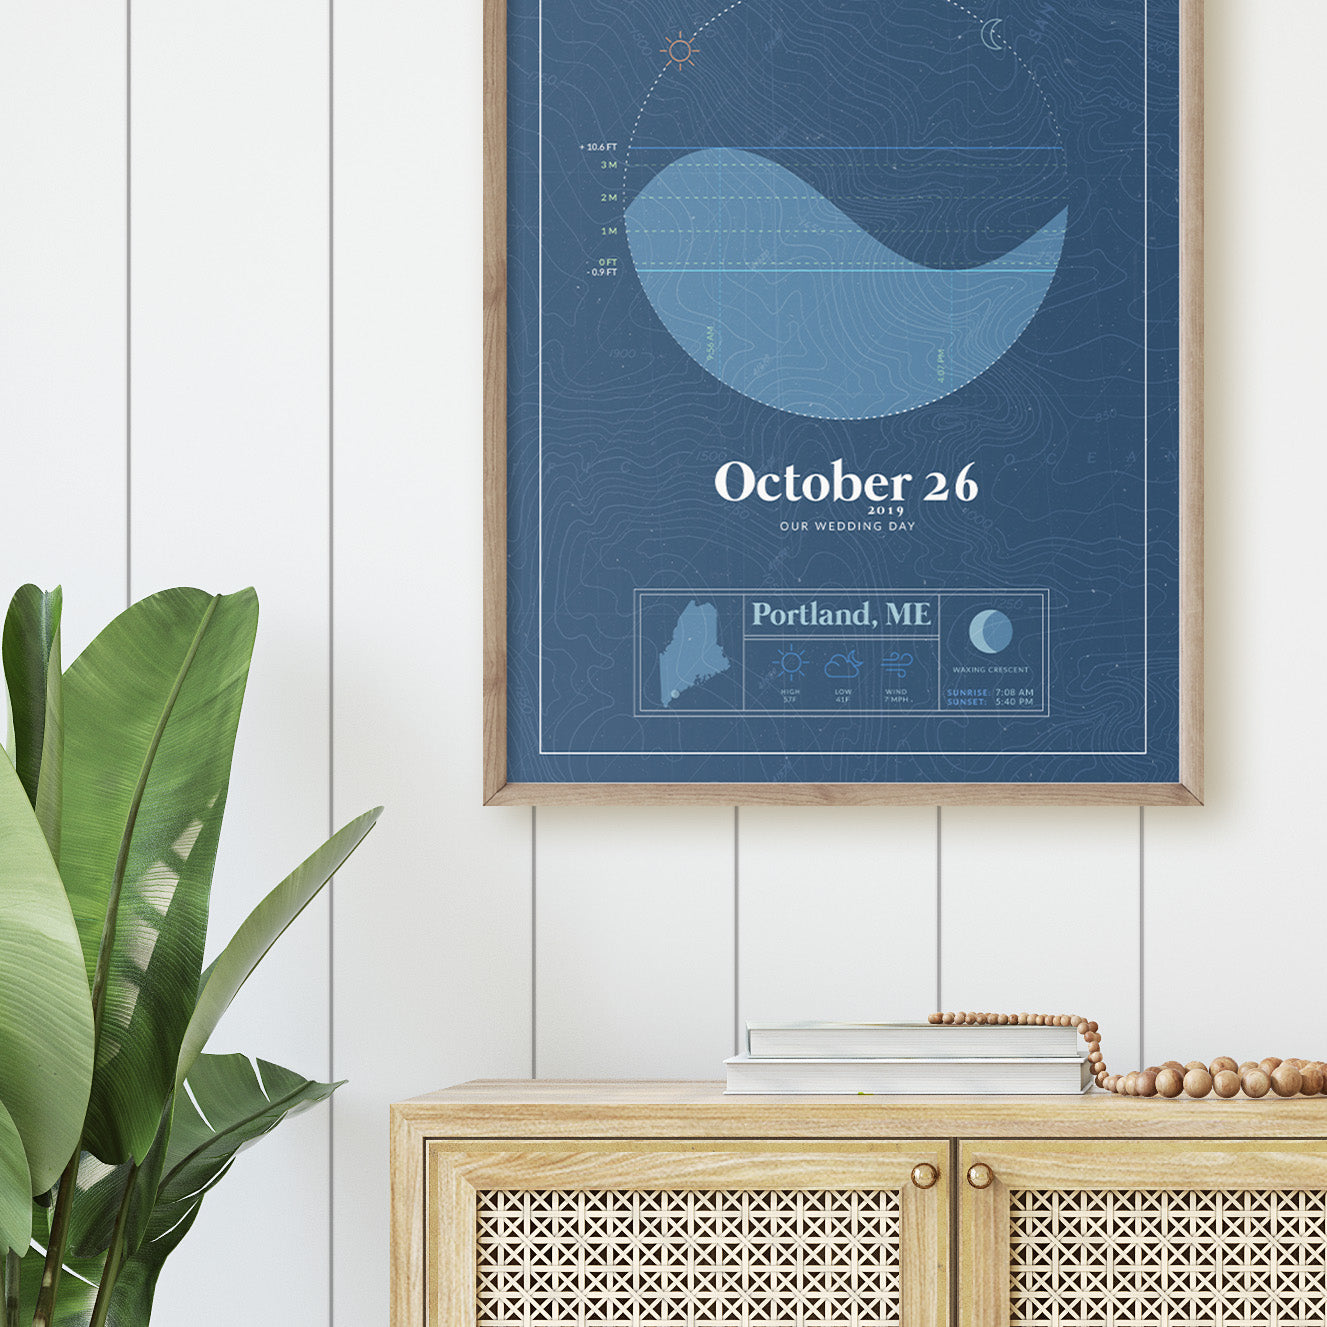 close up of the wood framed picture of the personalized tide map poster by salt atlas in the vintage cobalt blue color in a home setting. These are custom posters showing the tide, weather, and moon phase for a special day, like an anniversary or birthday.